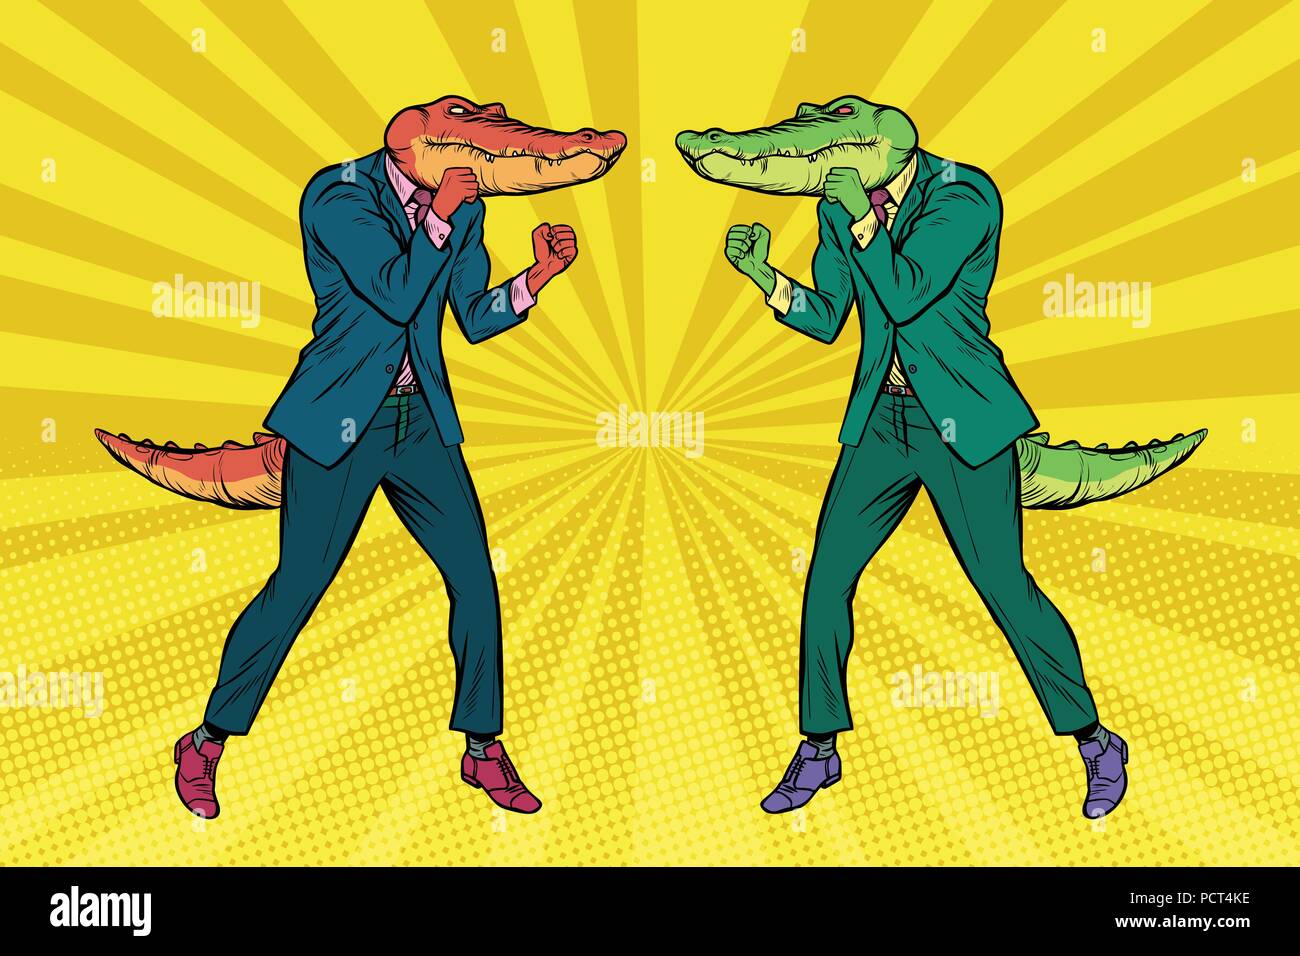 A fight between two businessmen crocodiles. Competition concept Stock Vector